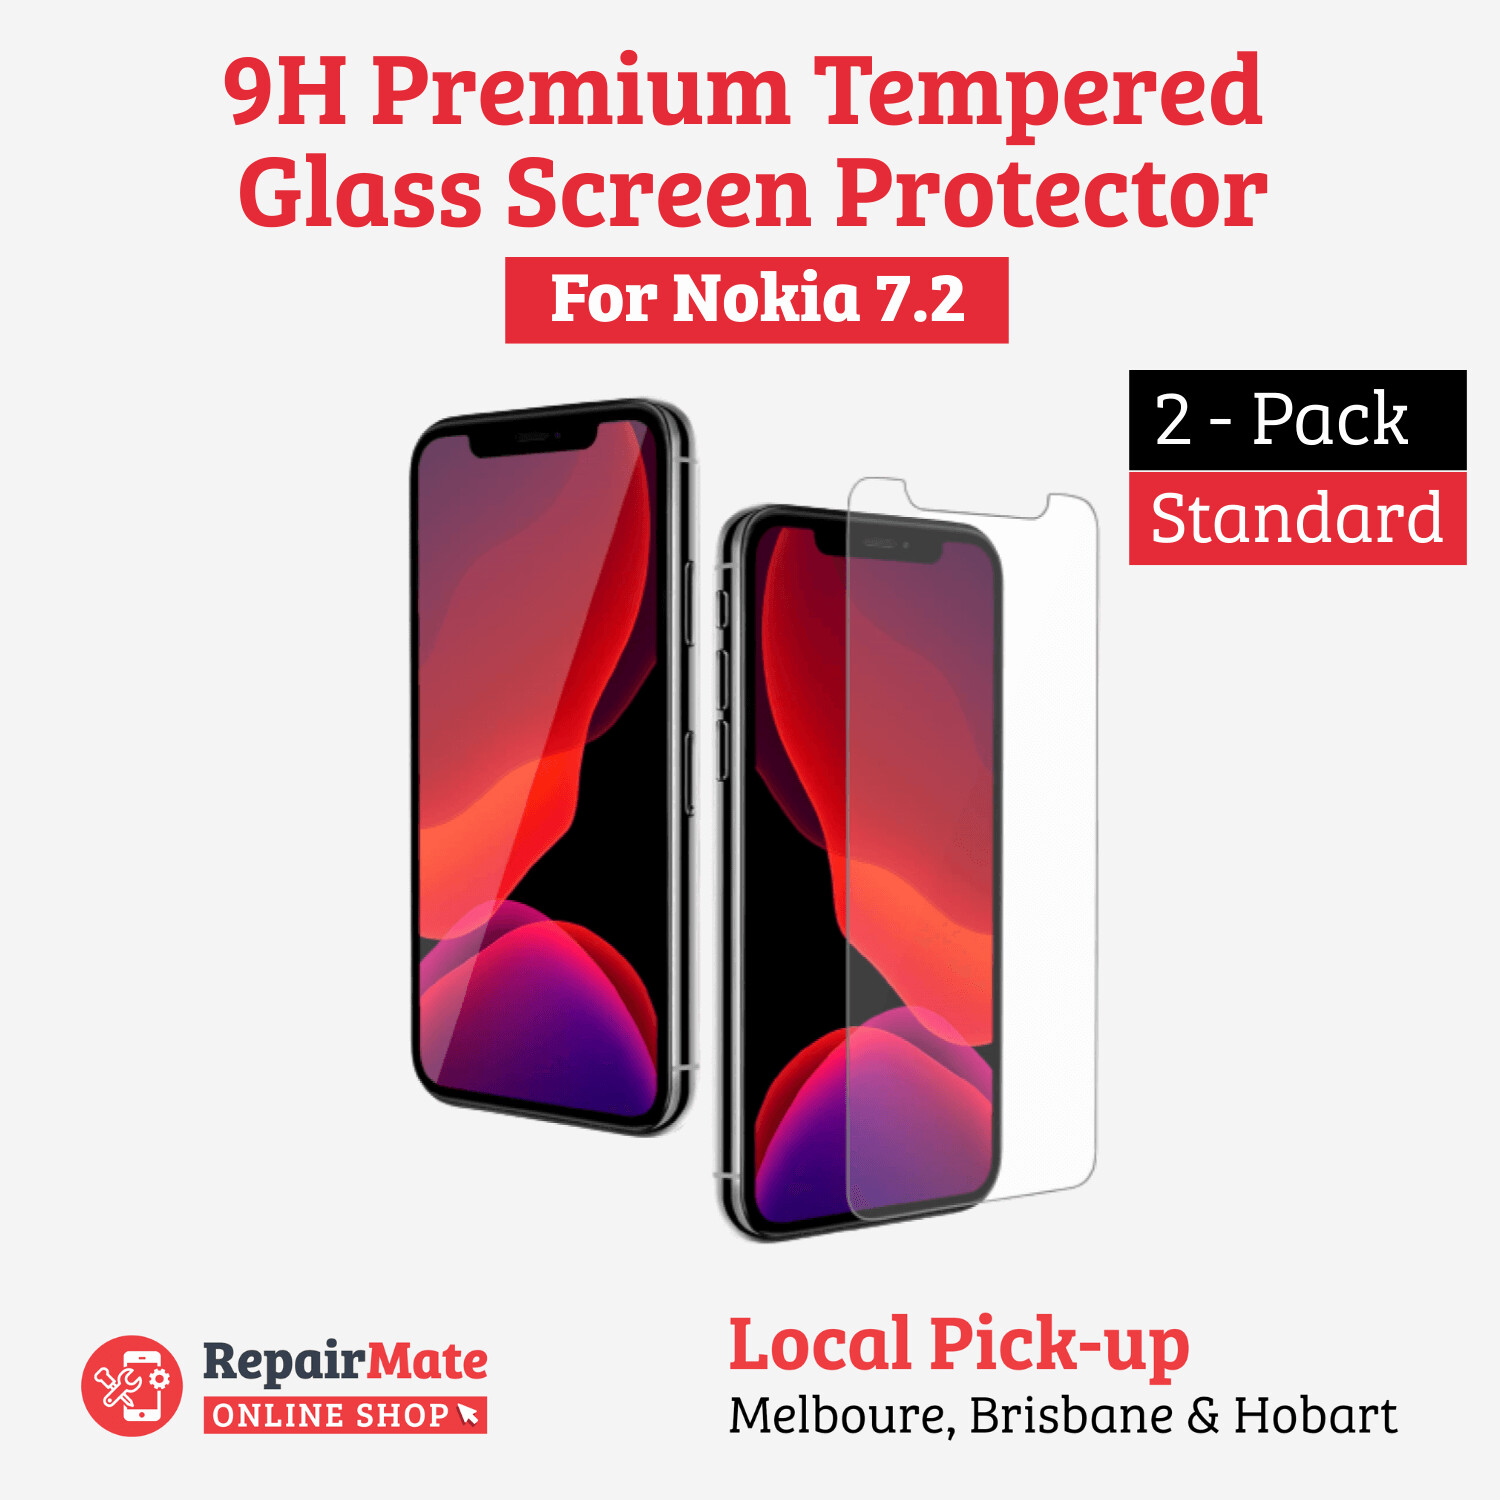 Nokia 7.2 9H Premium Tempered Glass Screen Protector [2 Pack]